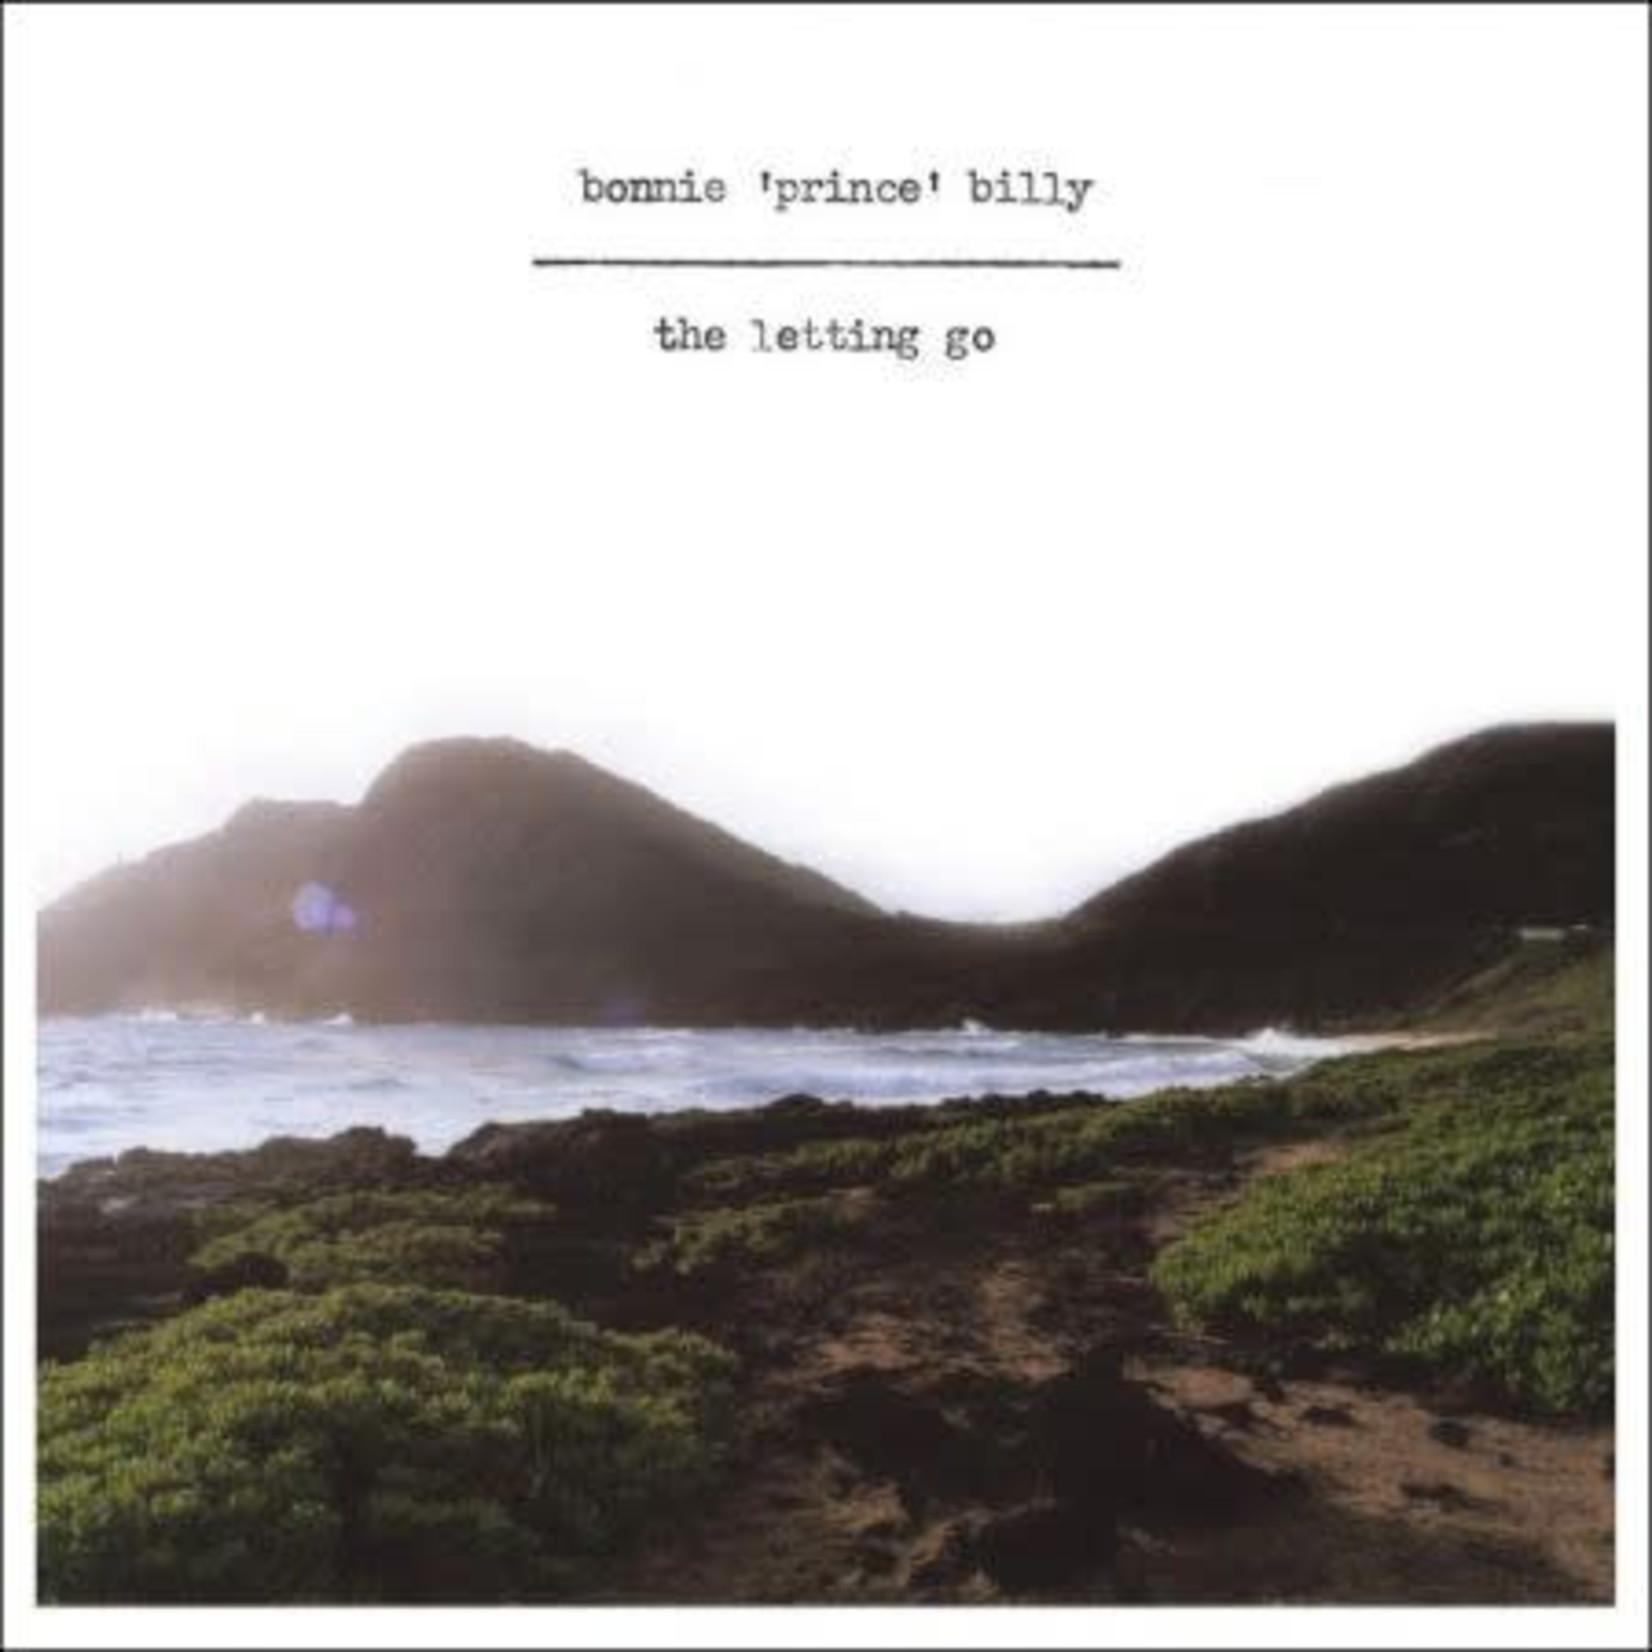 [New] Bonnie Prince Billy - The Letting Go